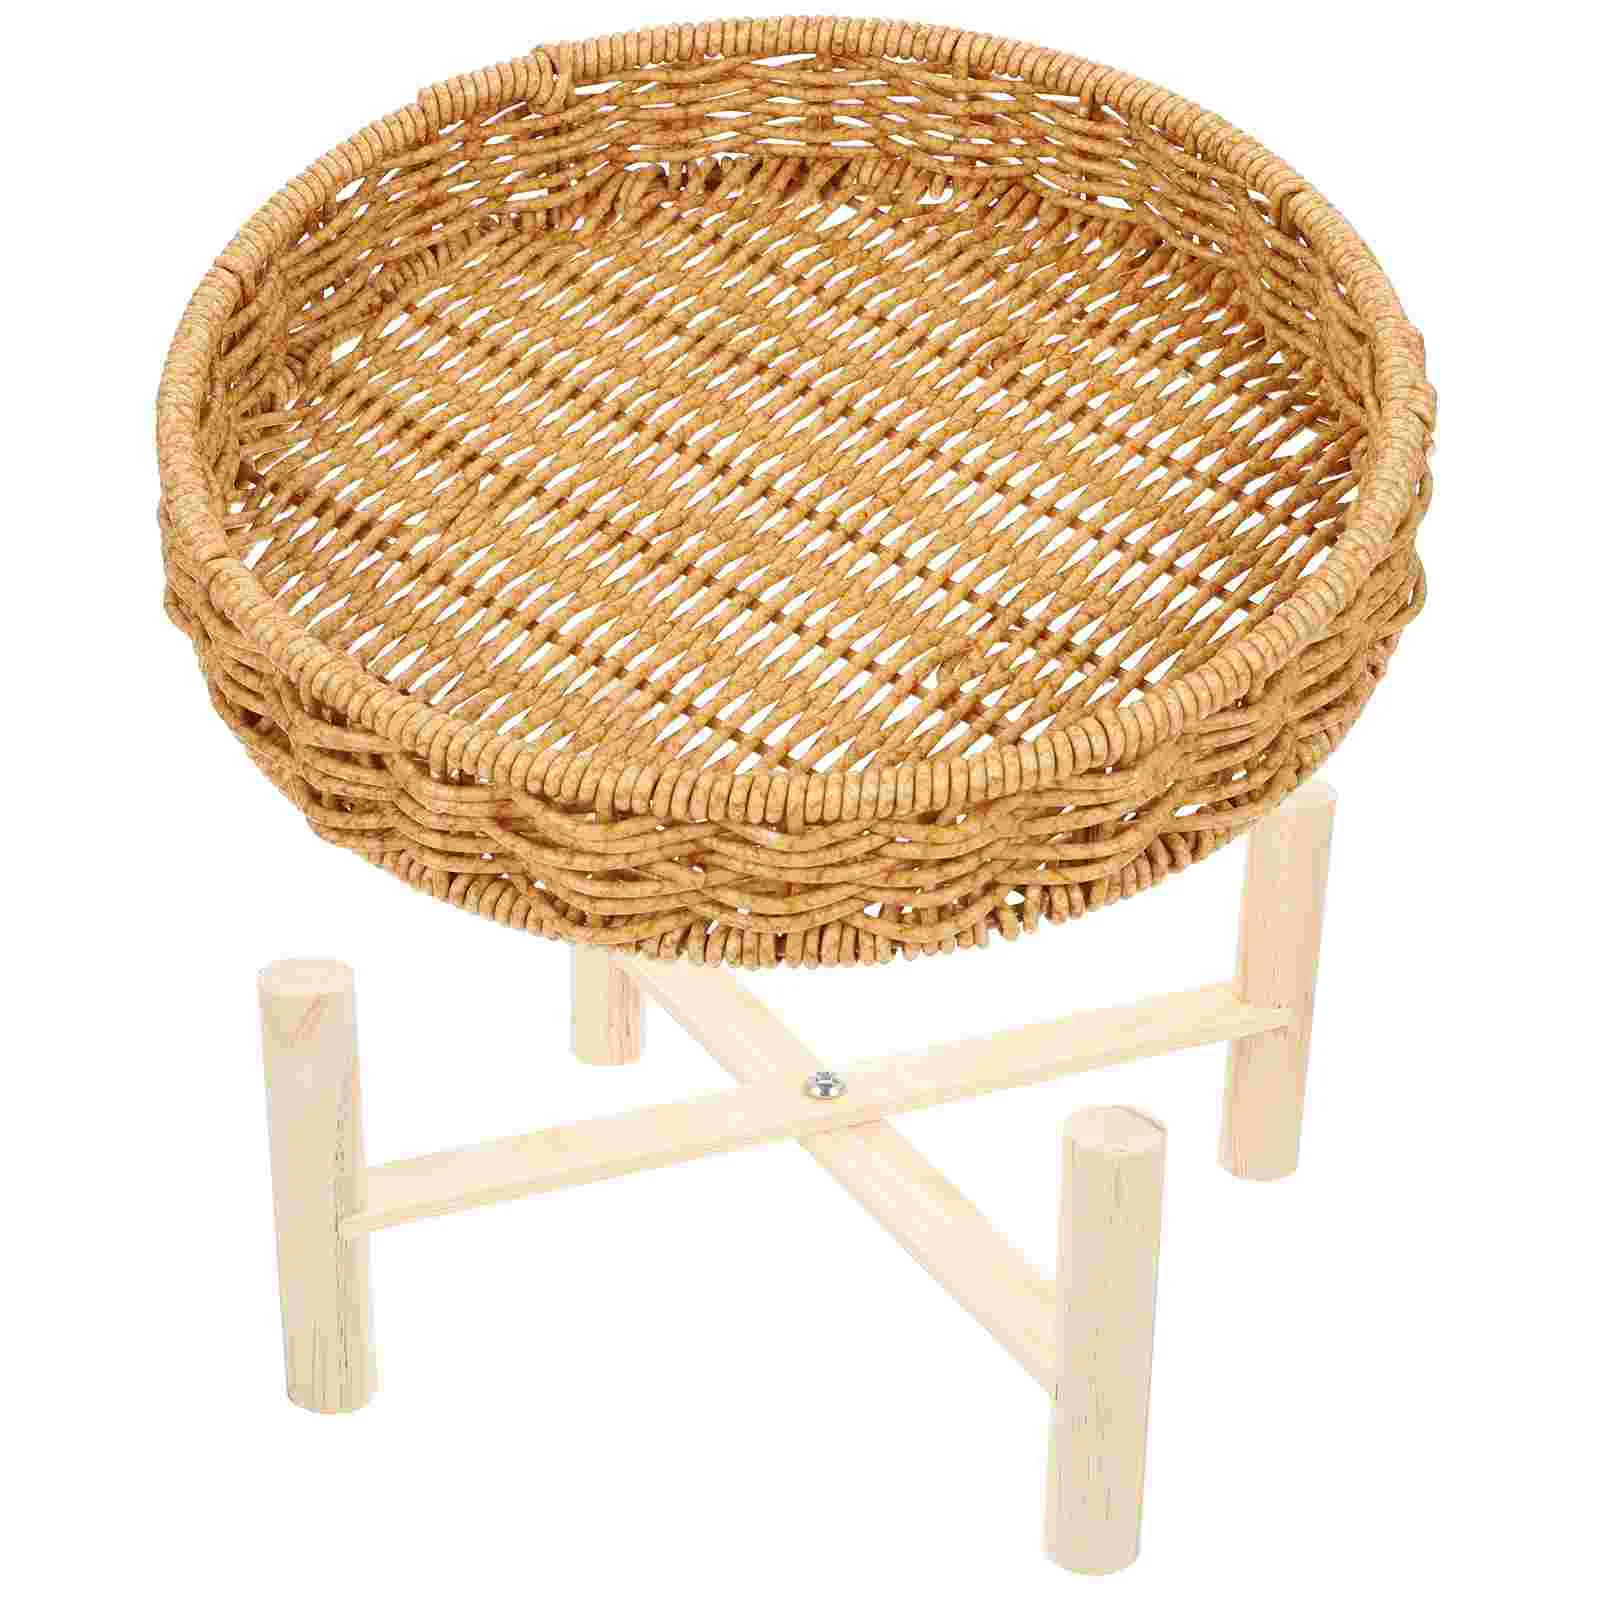 

Tray Basket Serving Fruit Bread Woven Candy Wicker Rattan Snack Storage Table Bowls Round Coffee Trays Baskets Decorative Pantry